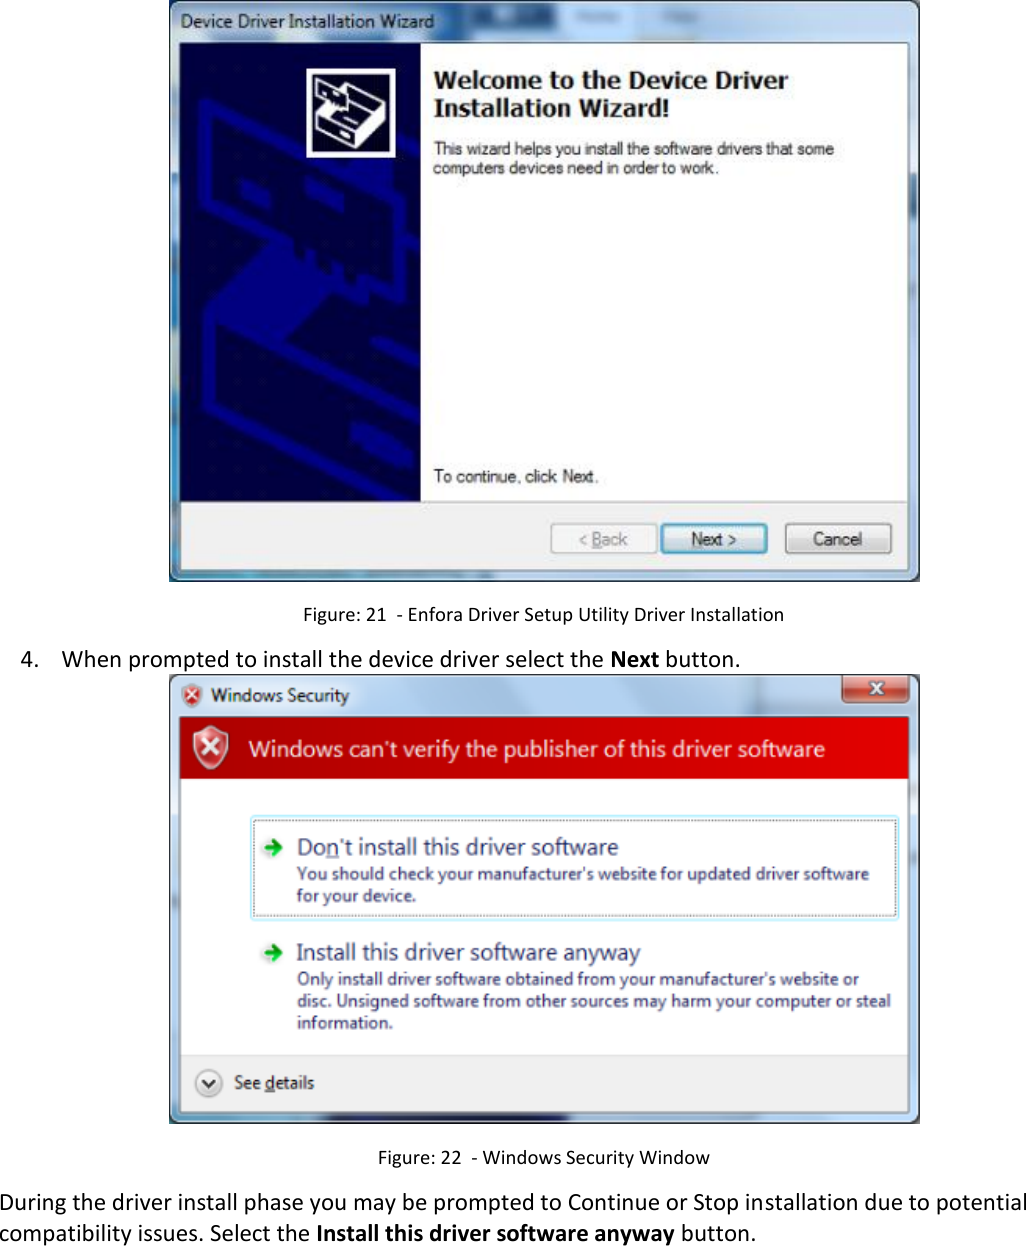    Figure: 21  - Enfora Driver Setup Utility Driver Installation  4. When prompted to install the device driver select the Next button.  Figure: 22  - Windows Security Window During the driver install phase you may be prompted to Continue or Stop installation due to potential compatibility issues. Select the Install this driver software anyway button. 